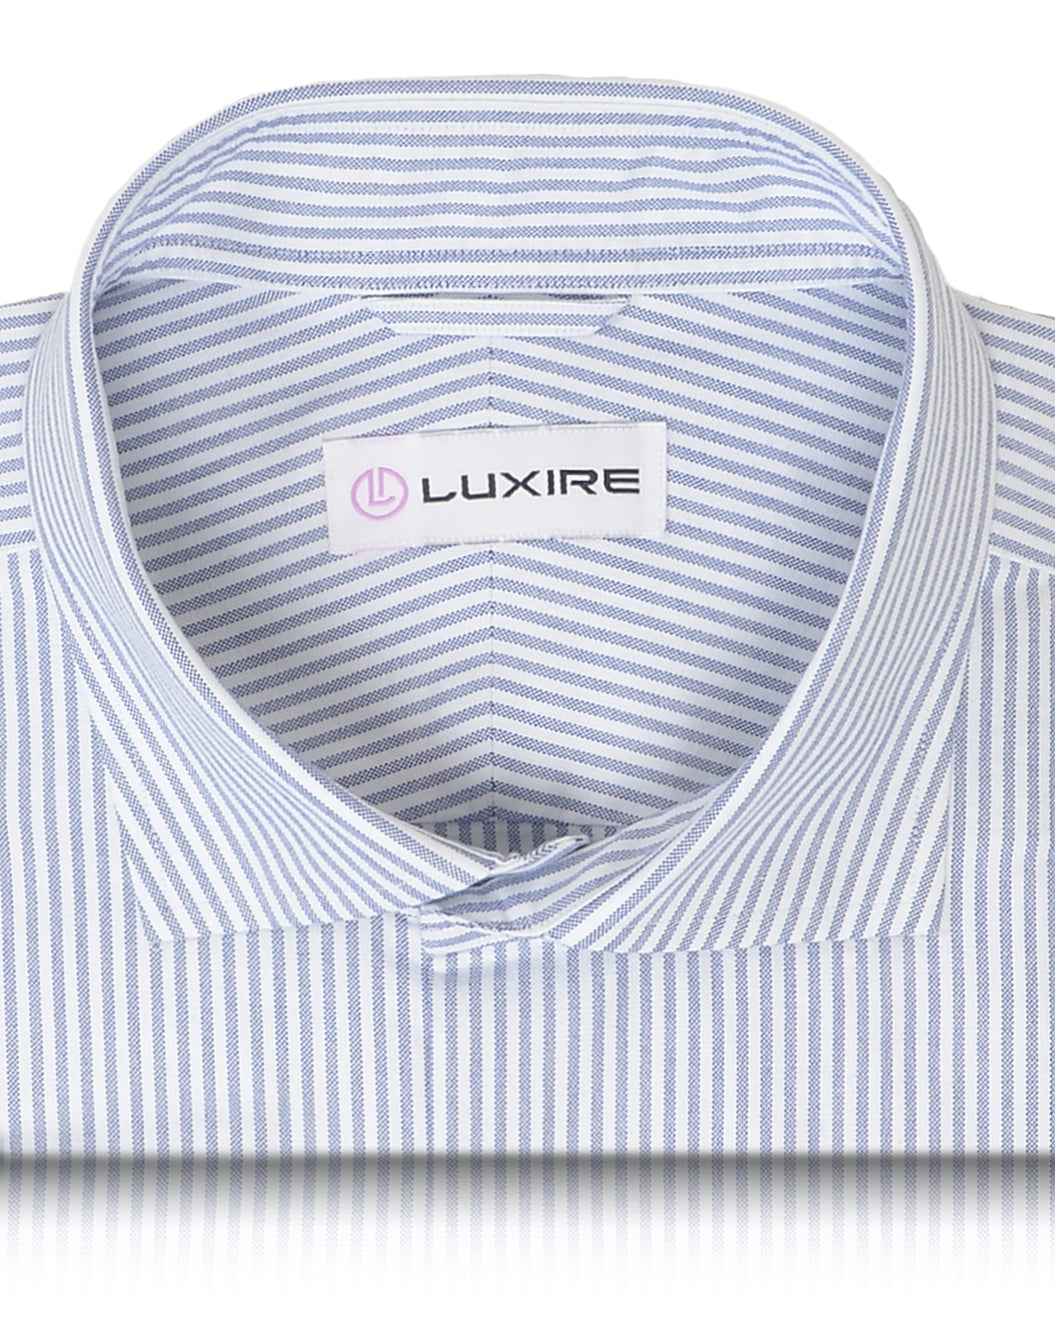 Collar of the custom oxford shirt for men by Luxire in cornflower dress stripes